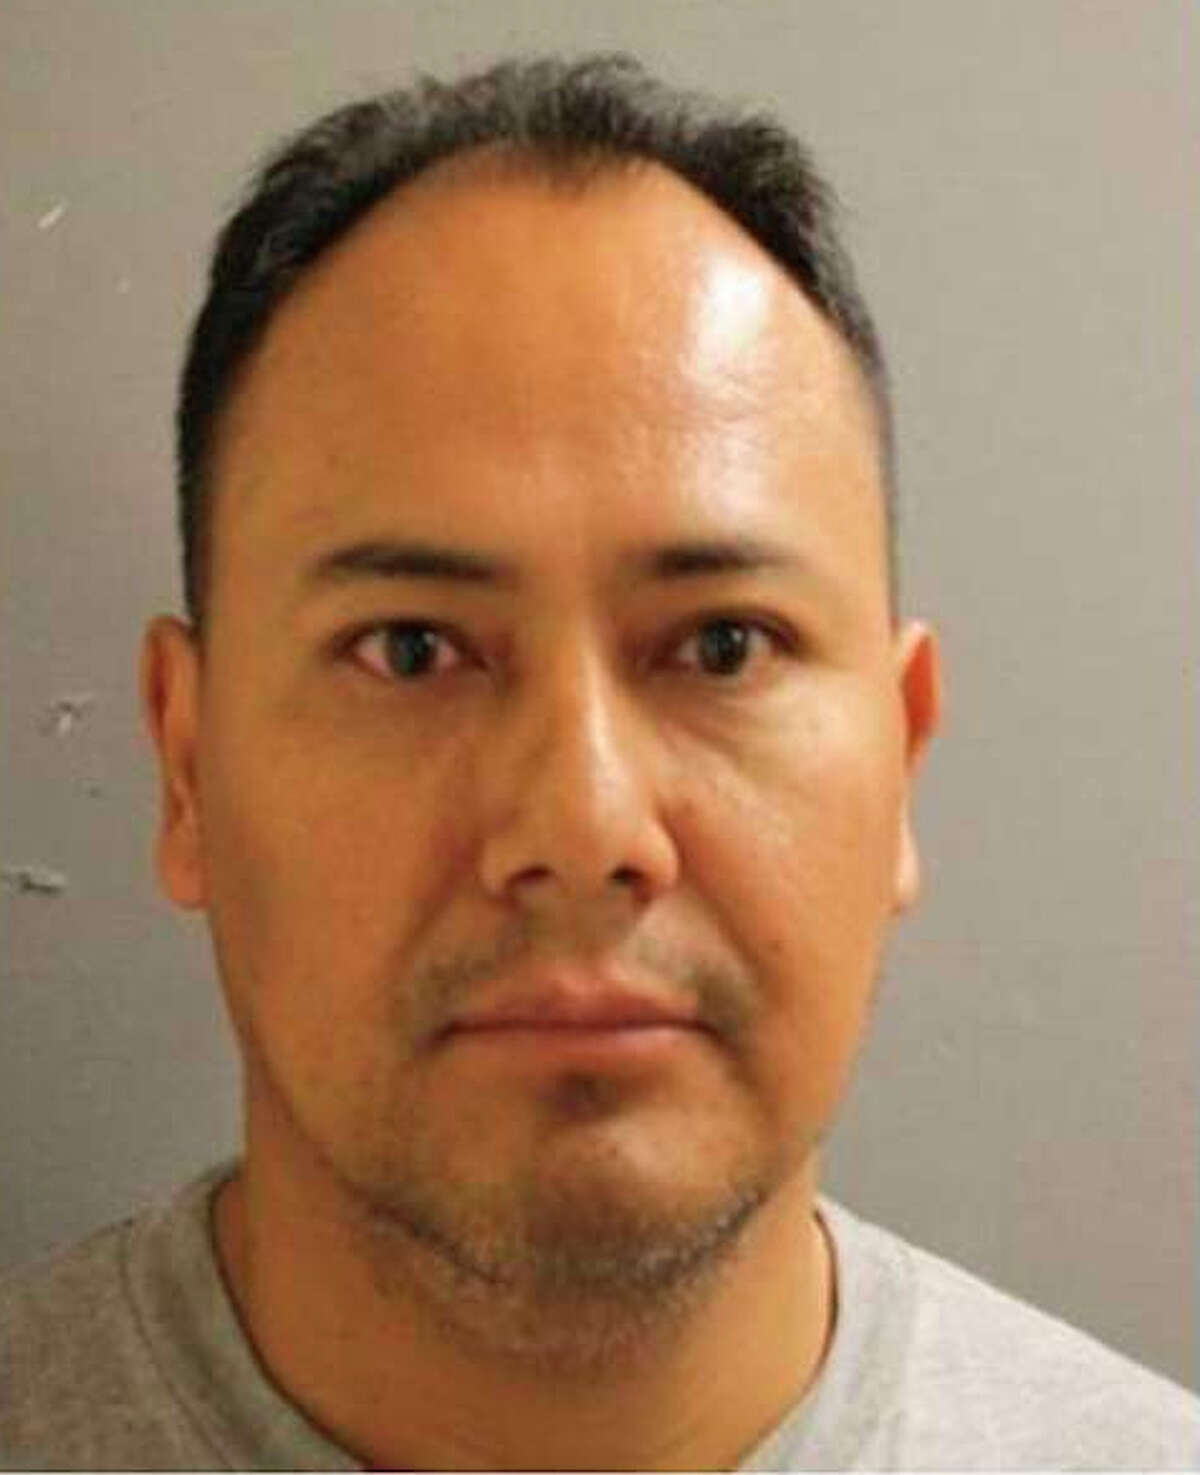 Mauricio Mendoza, 37, has been charged with aggravated sexual assault of a student at a Houston middle school.